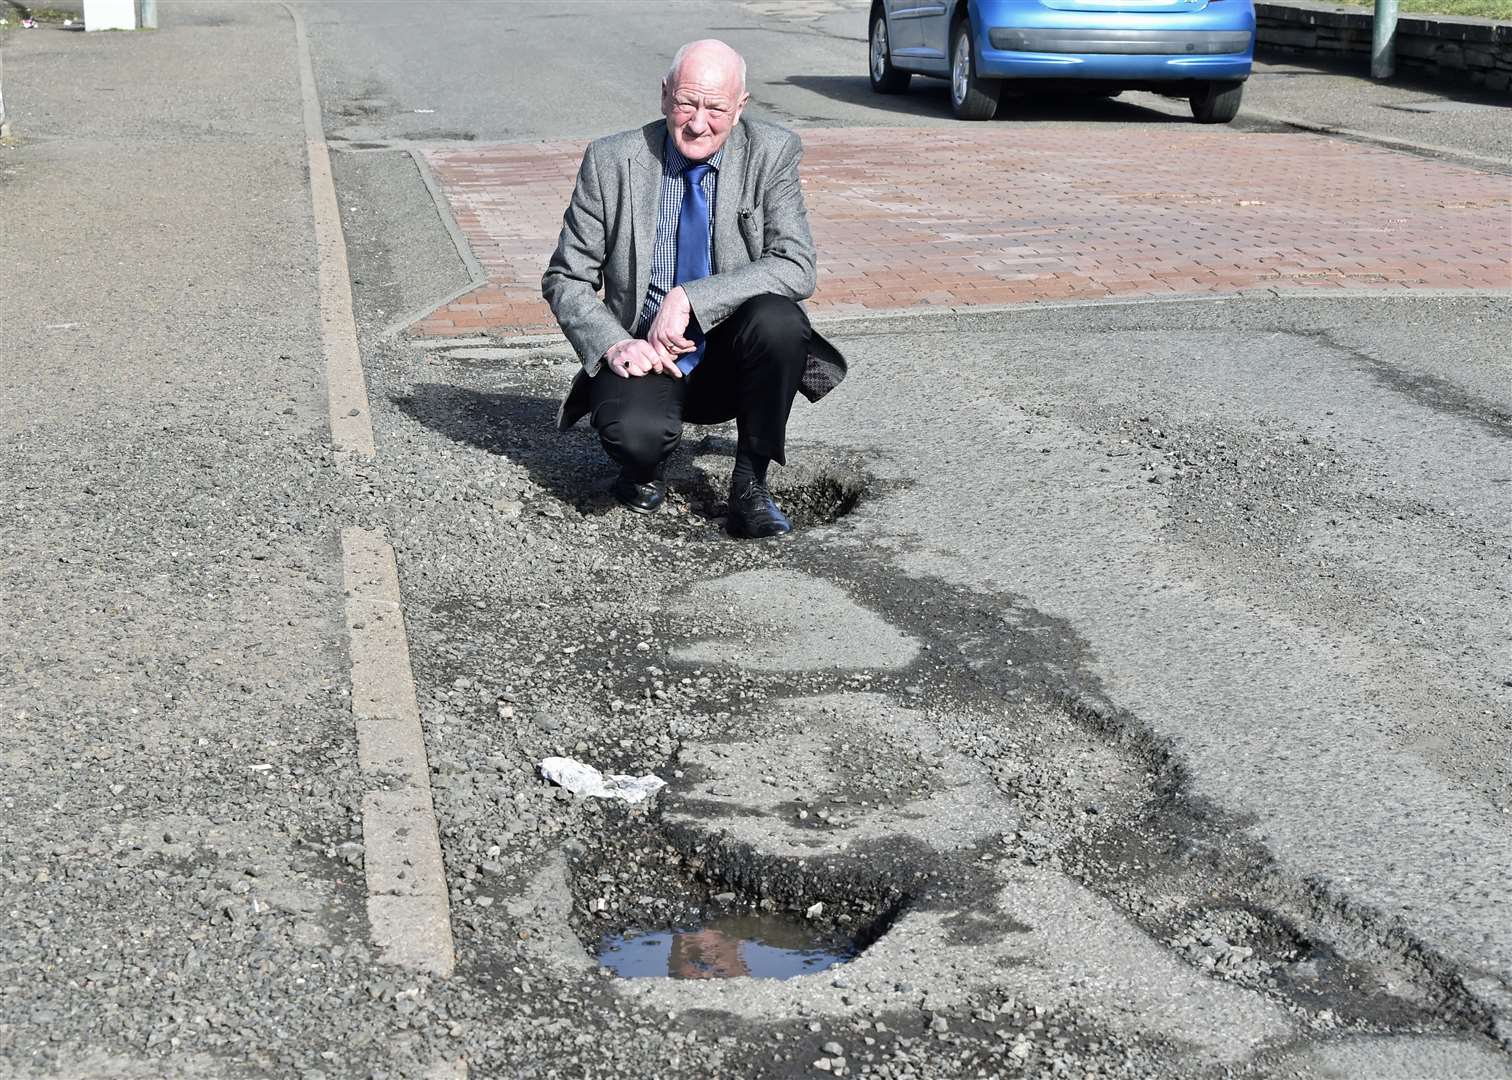 Iain Gregory set up Caithness Roads Recovery to campaign for improvements.